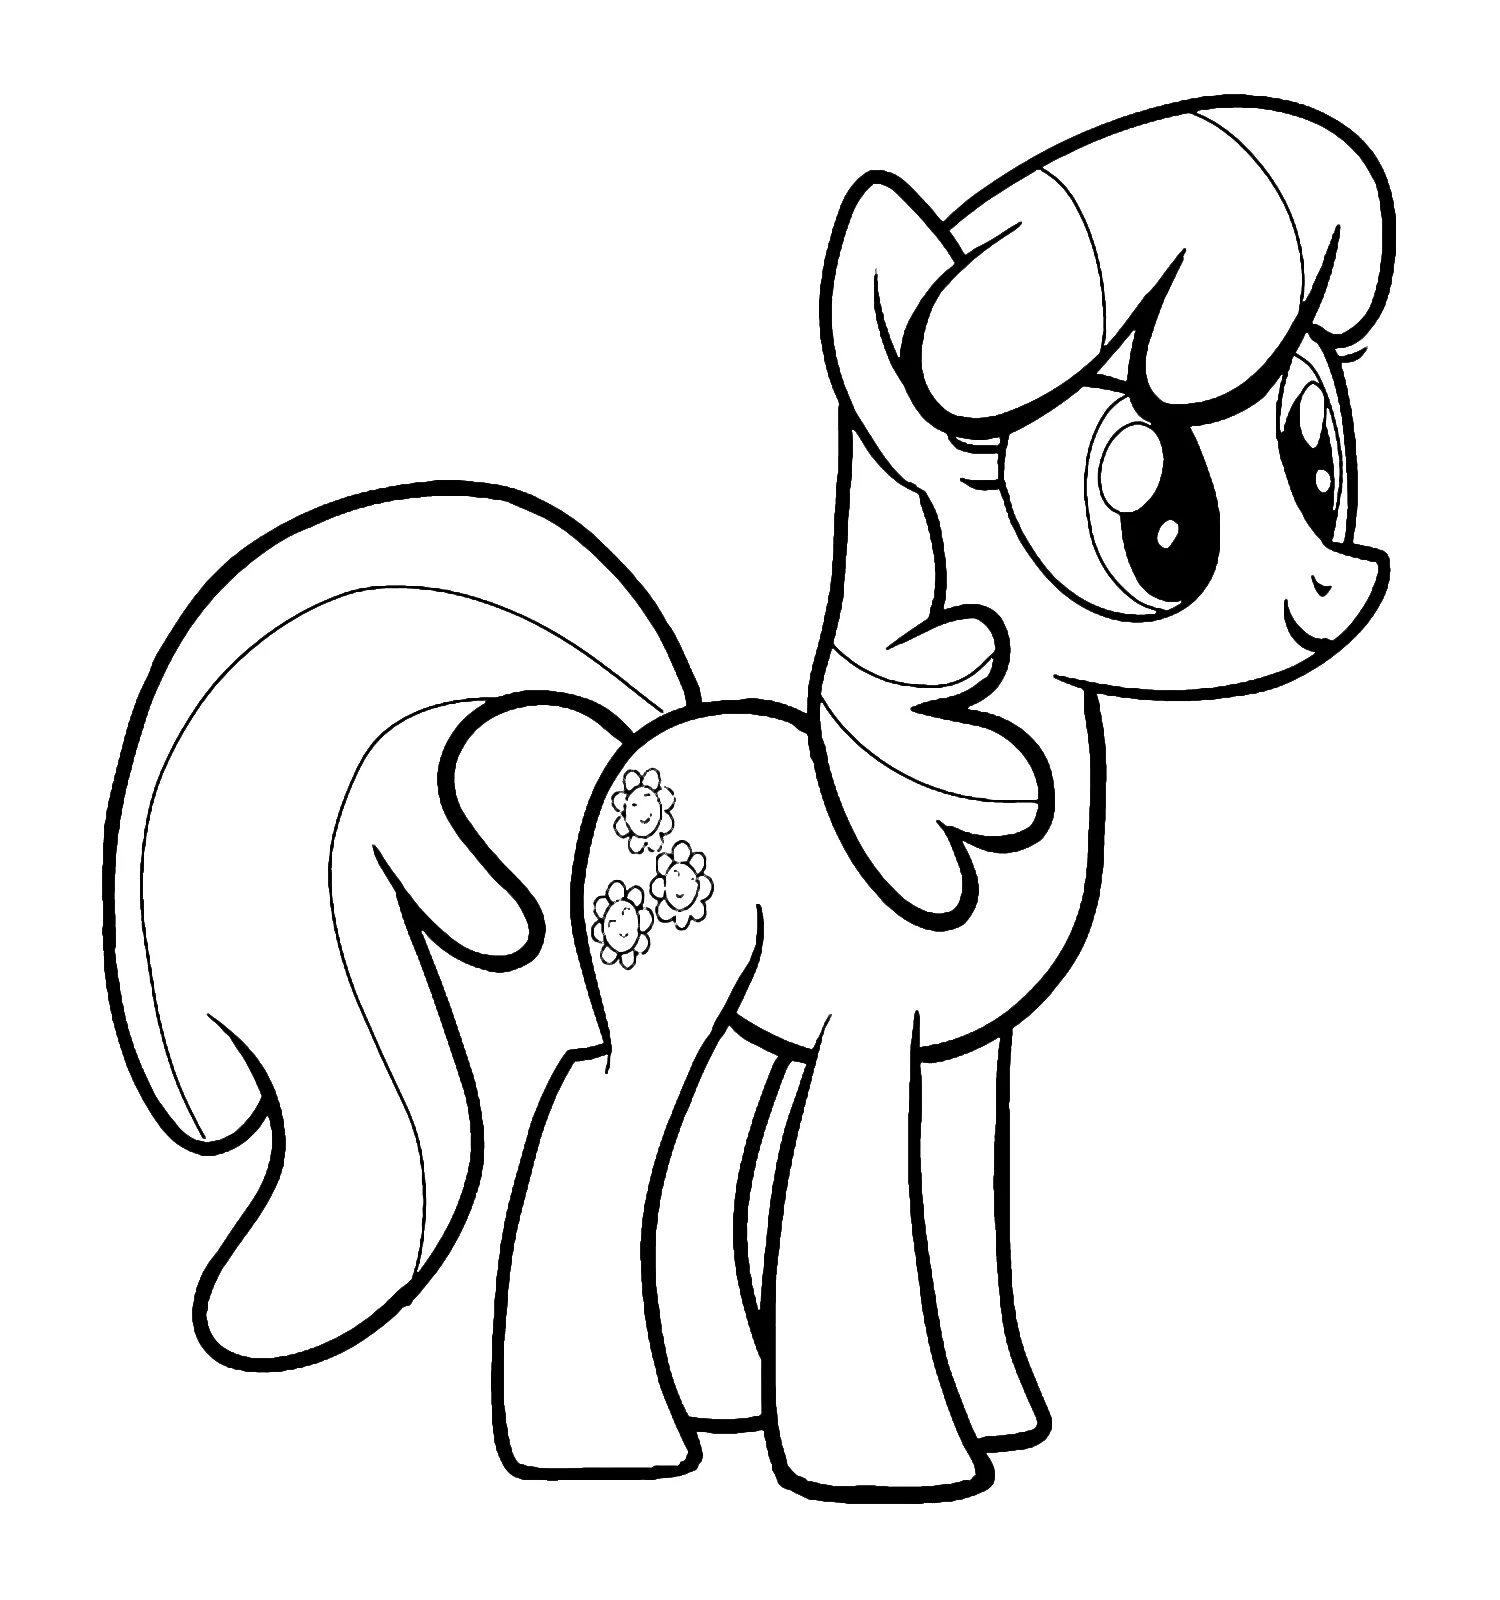 Sunny easy pony coloring page